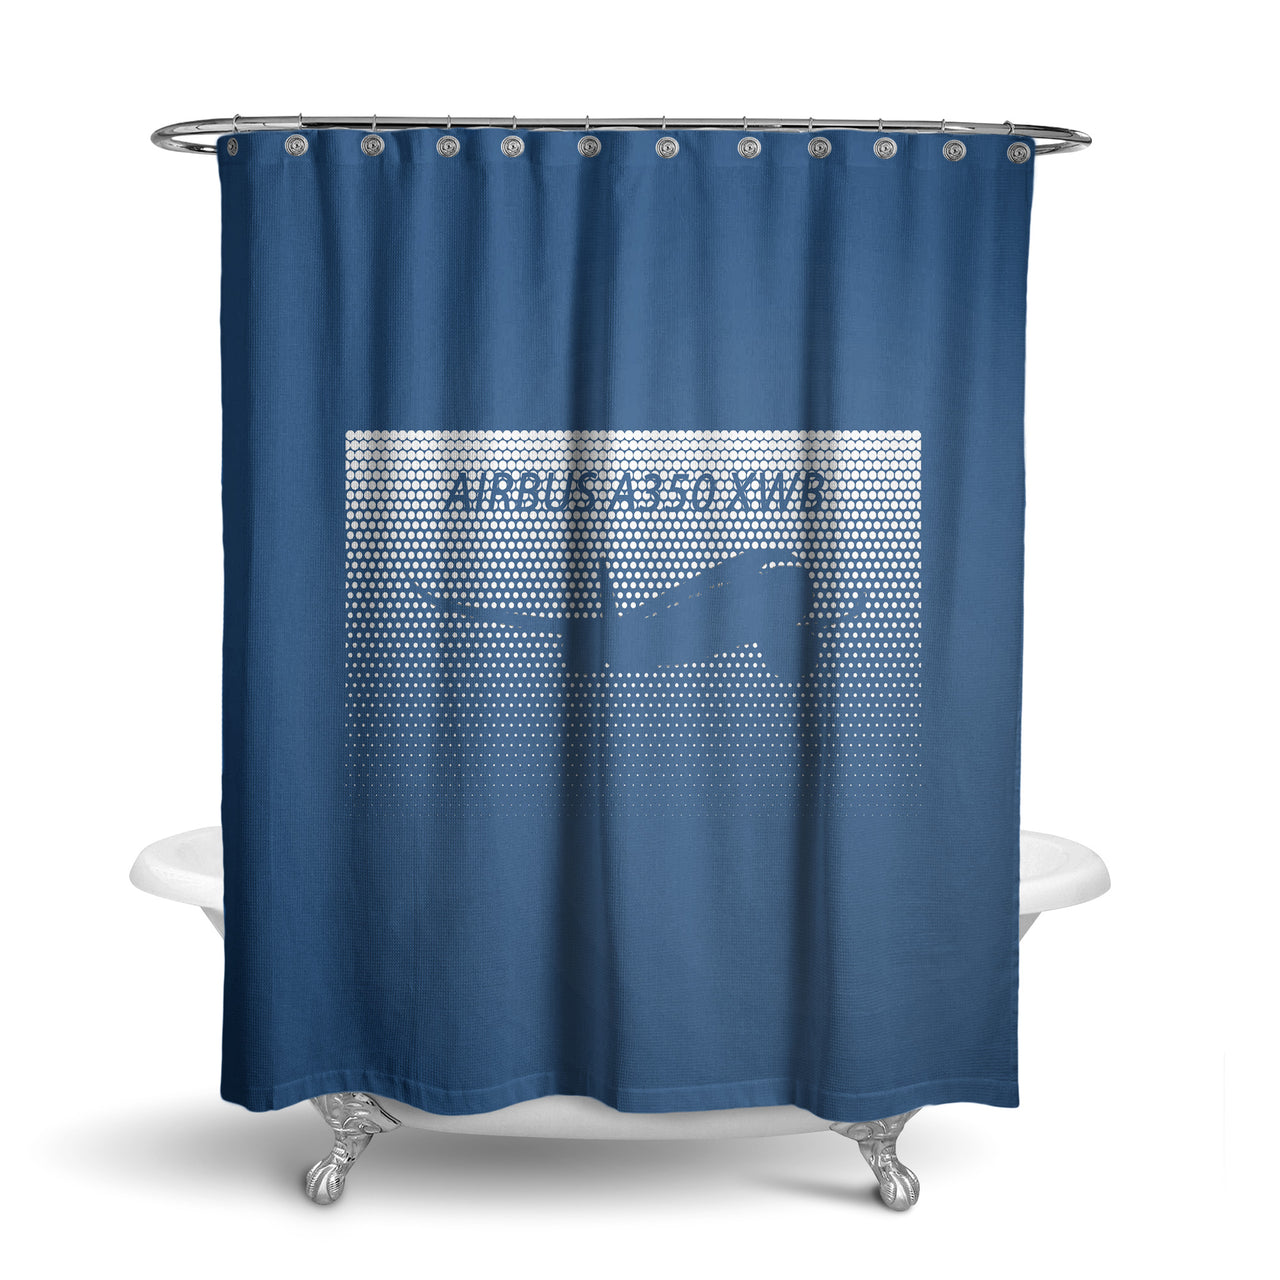 Airbus A350XWB & Dots Designed Shower Curtains